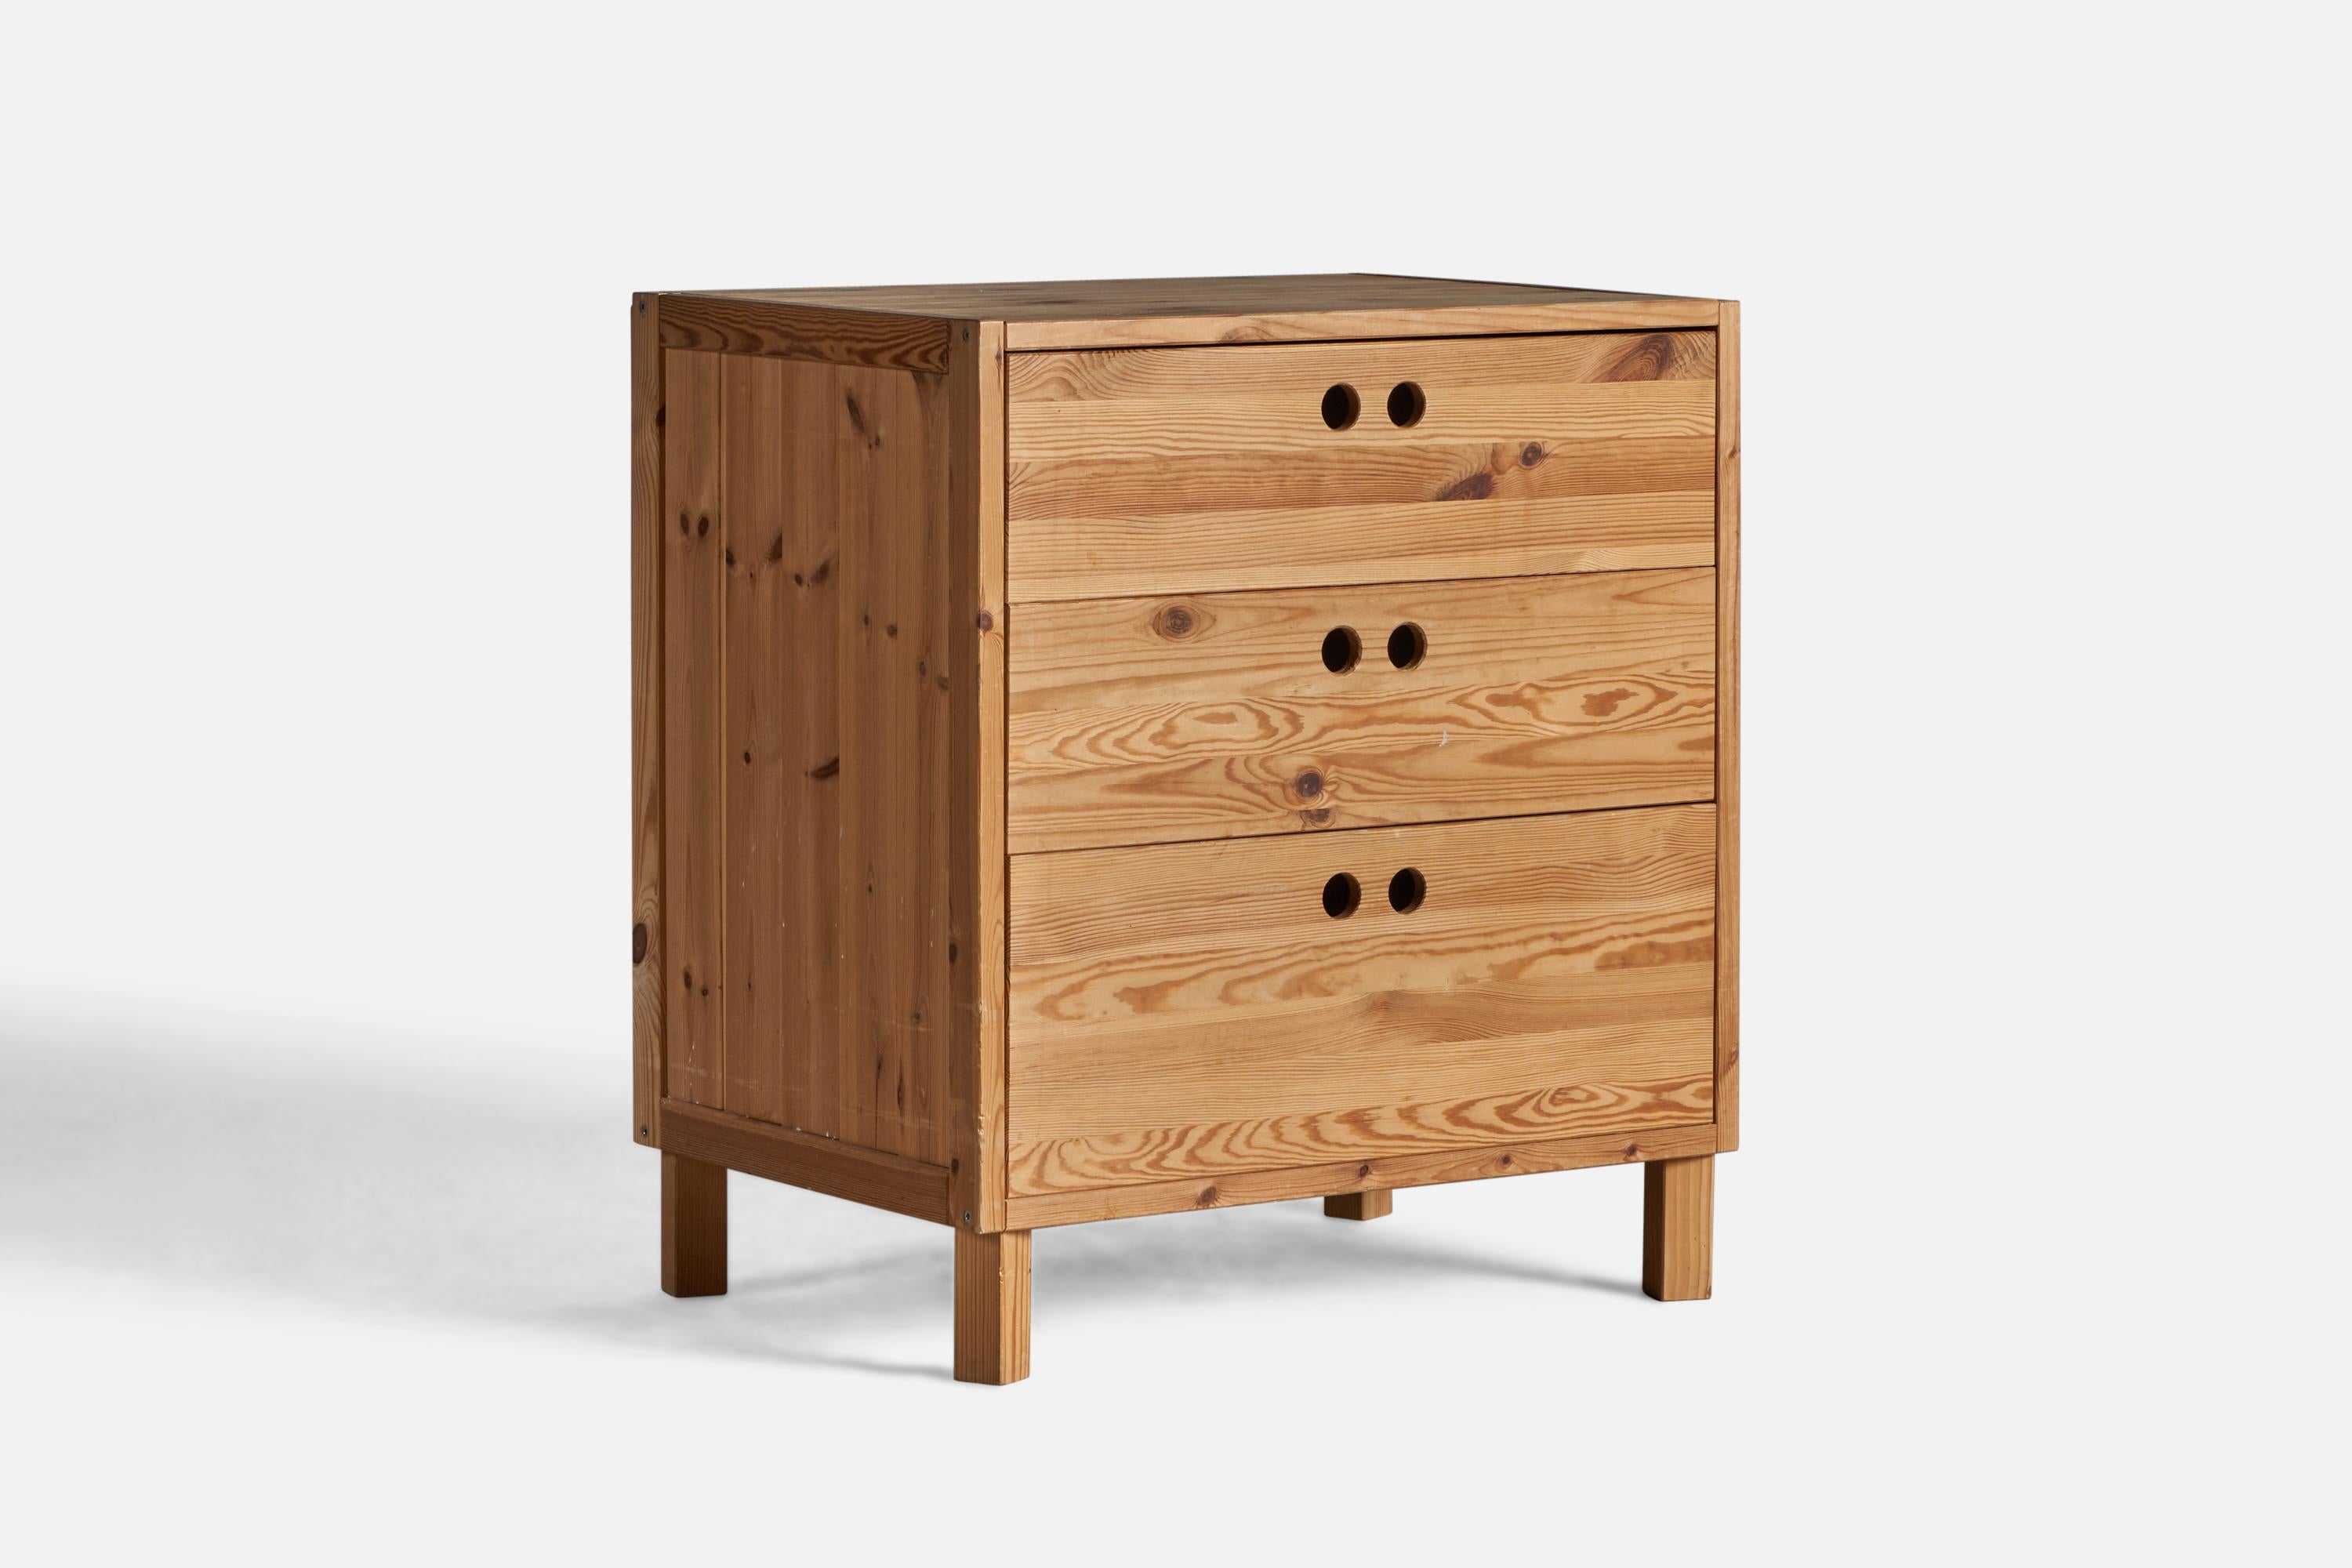 A pine commode designed and produced in Sweden, c. 1970s.